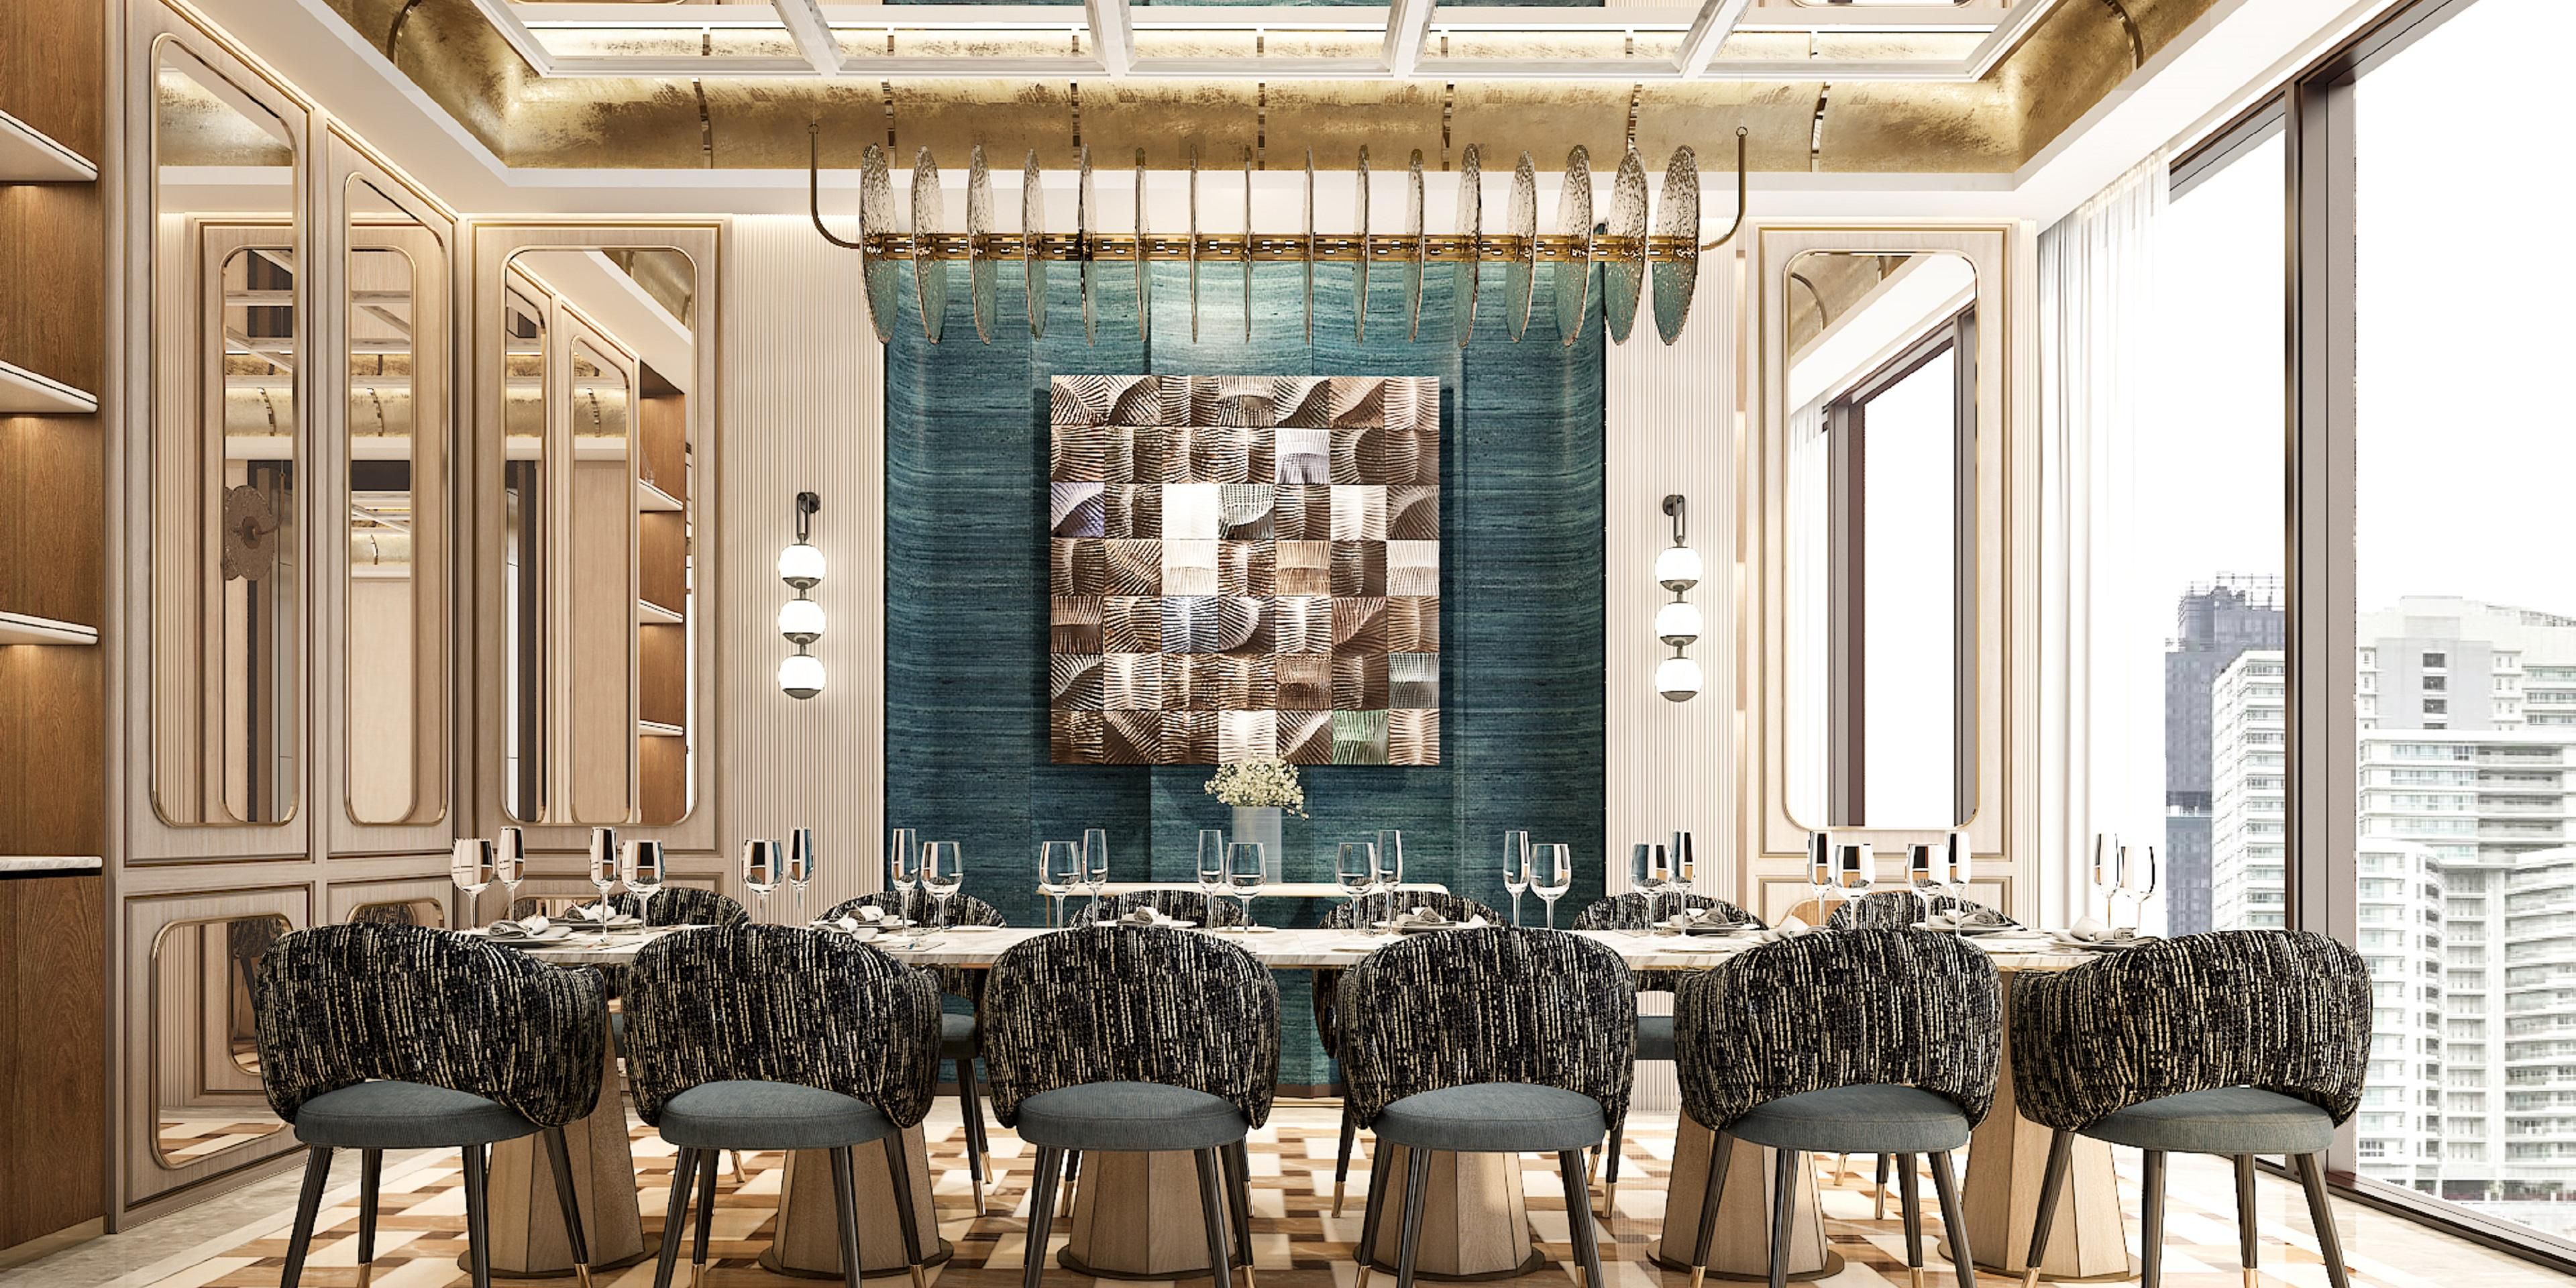 Indulge in a gastronomic hub with The Lobby, an inviting all-day space for relaxation and socialising; AVA Brasserie, with international flavours and aviation-inspired design; and Rogues, a hidden gem providing an intimate atmosphere and versatile event space.